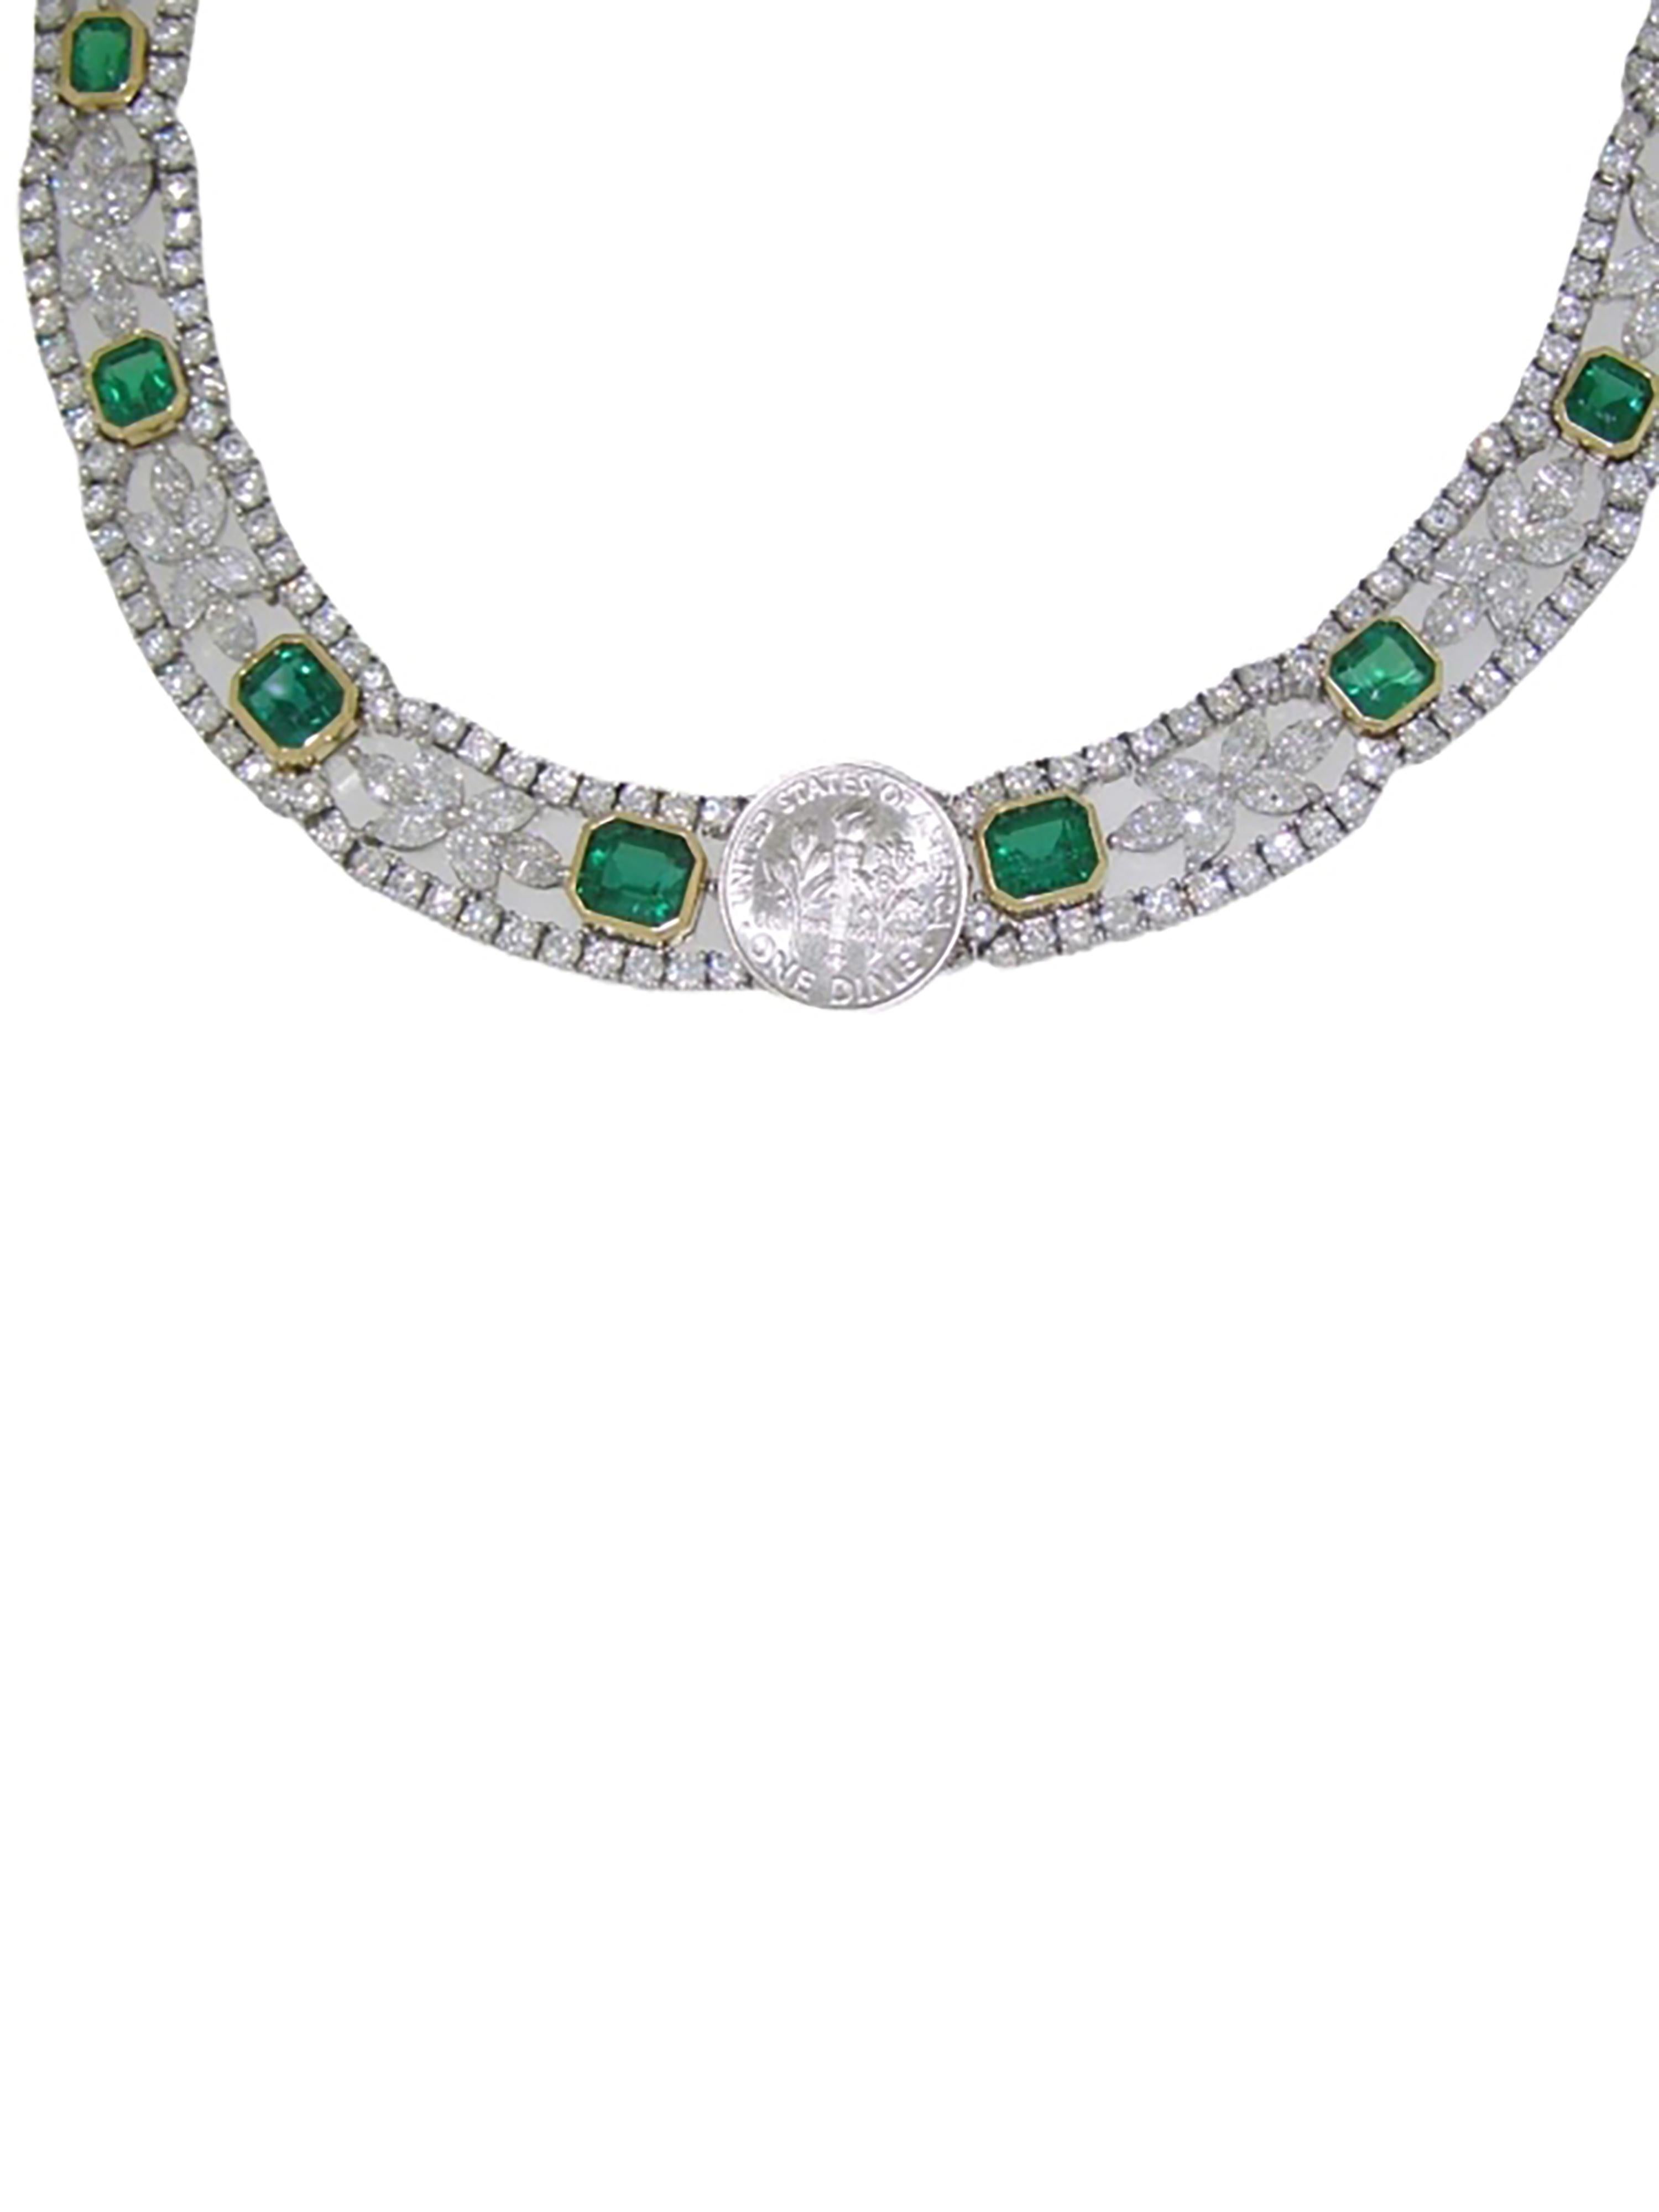 Brilliant Cut Tiffany & Co Platinum and 18k Yellow Gold Emerald Diamond Necklace For Sale